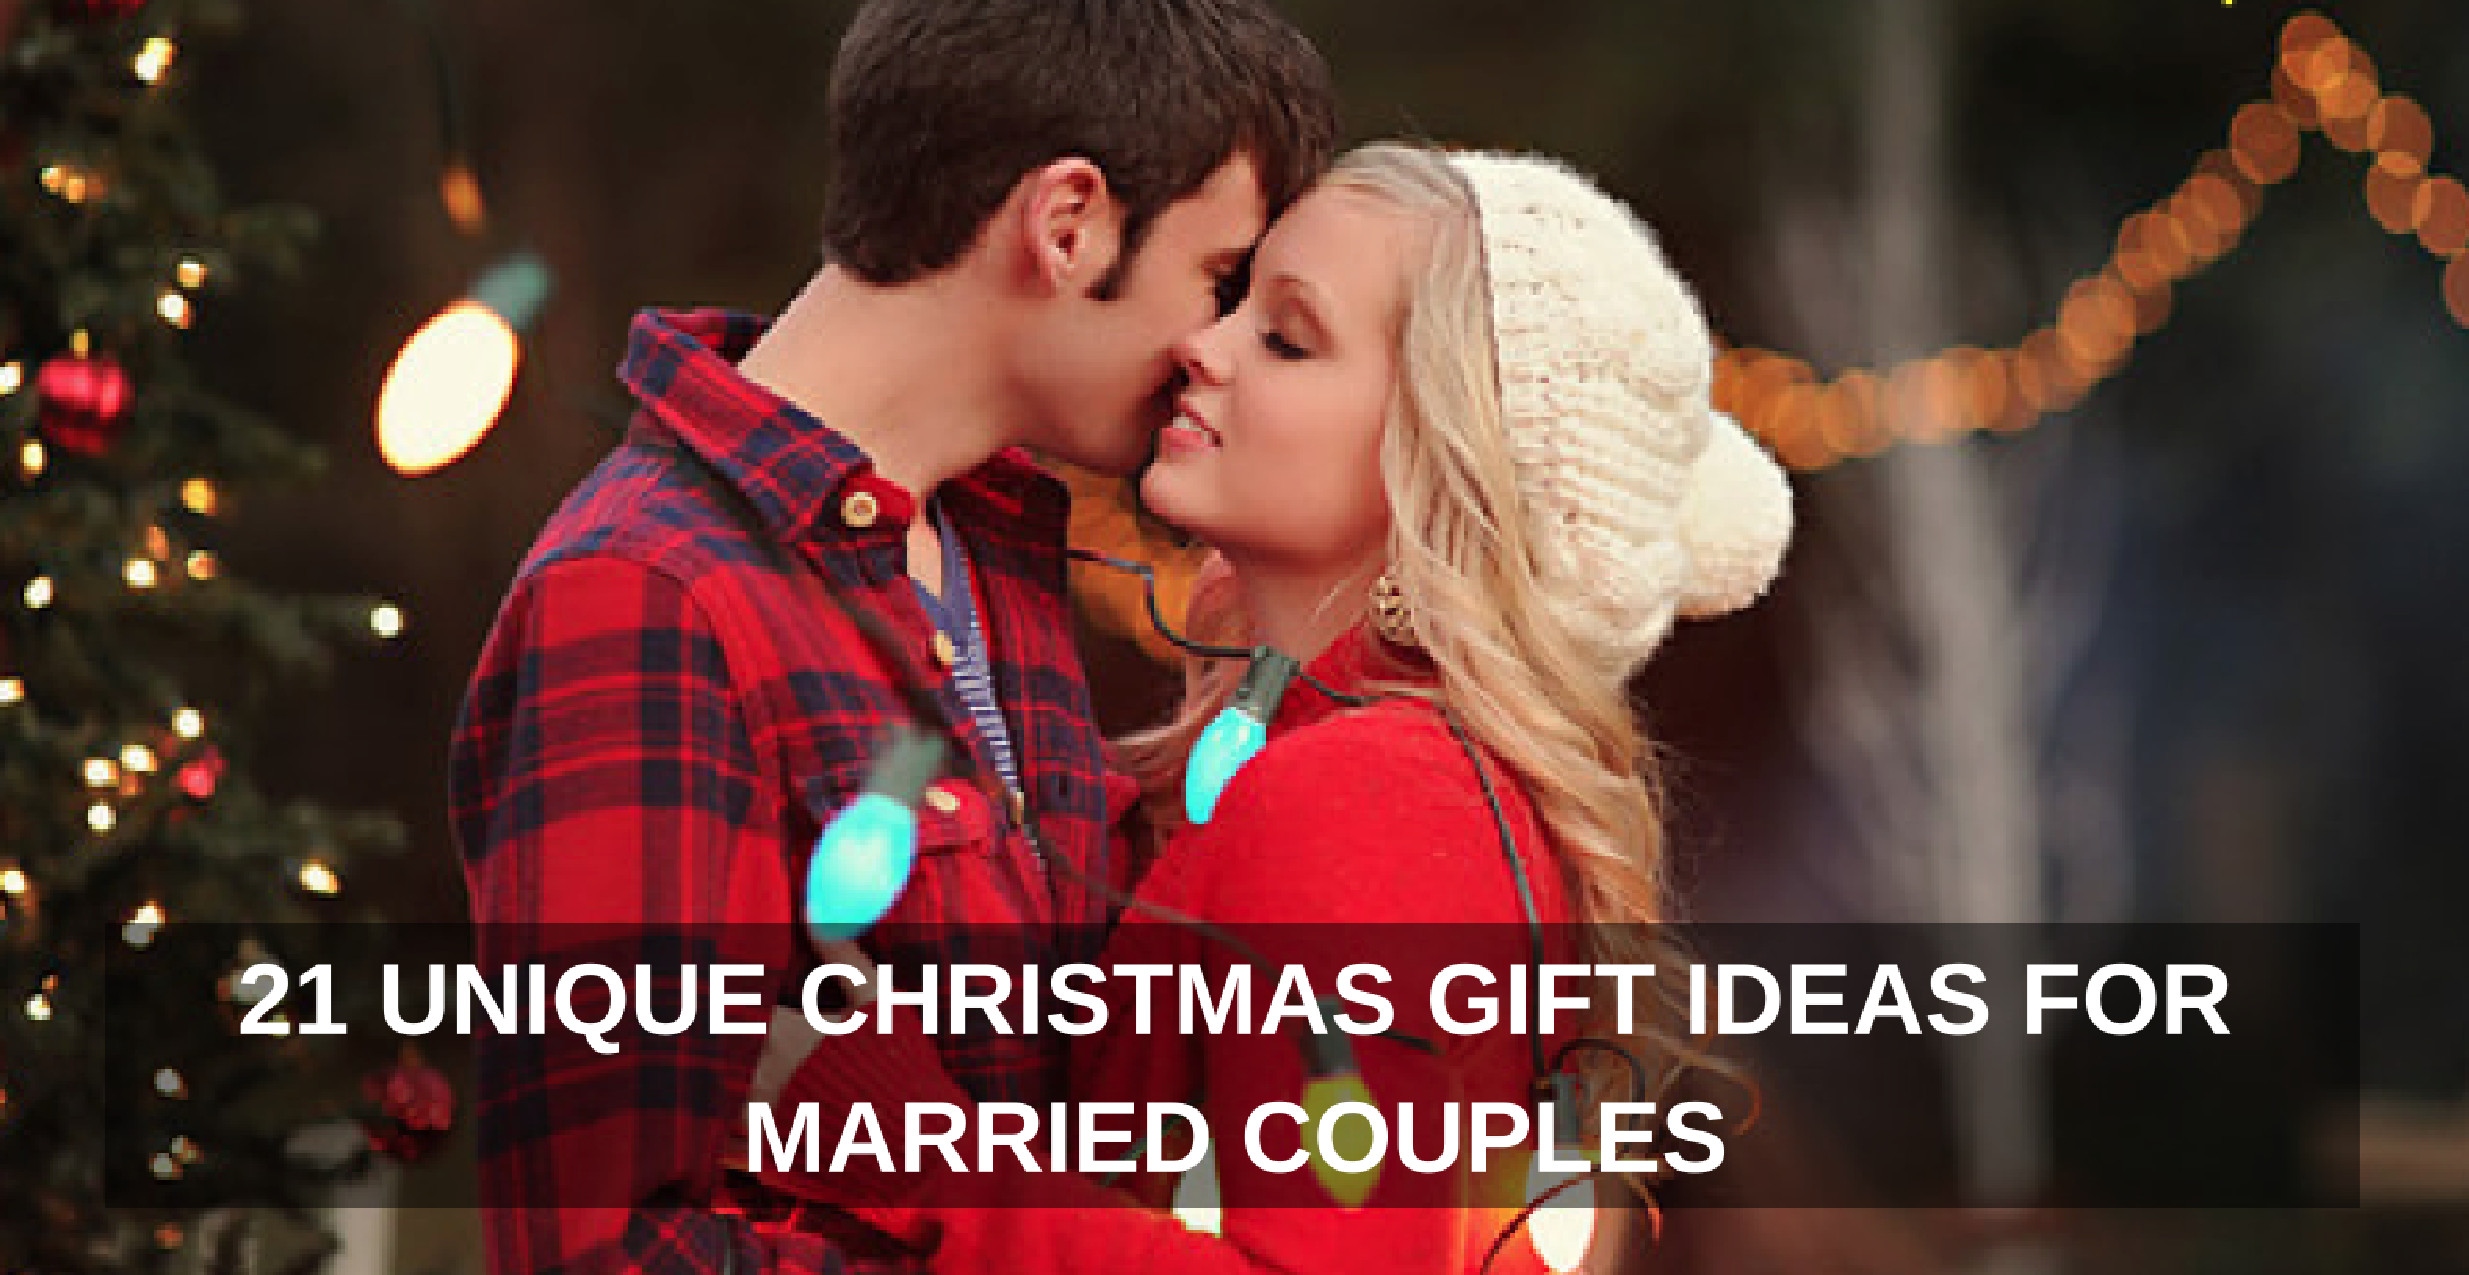 Couple Gift Ideas Christmas
 21 Unique Christmas Gift Ideas for Married Couples